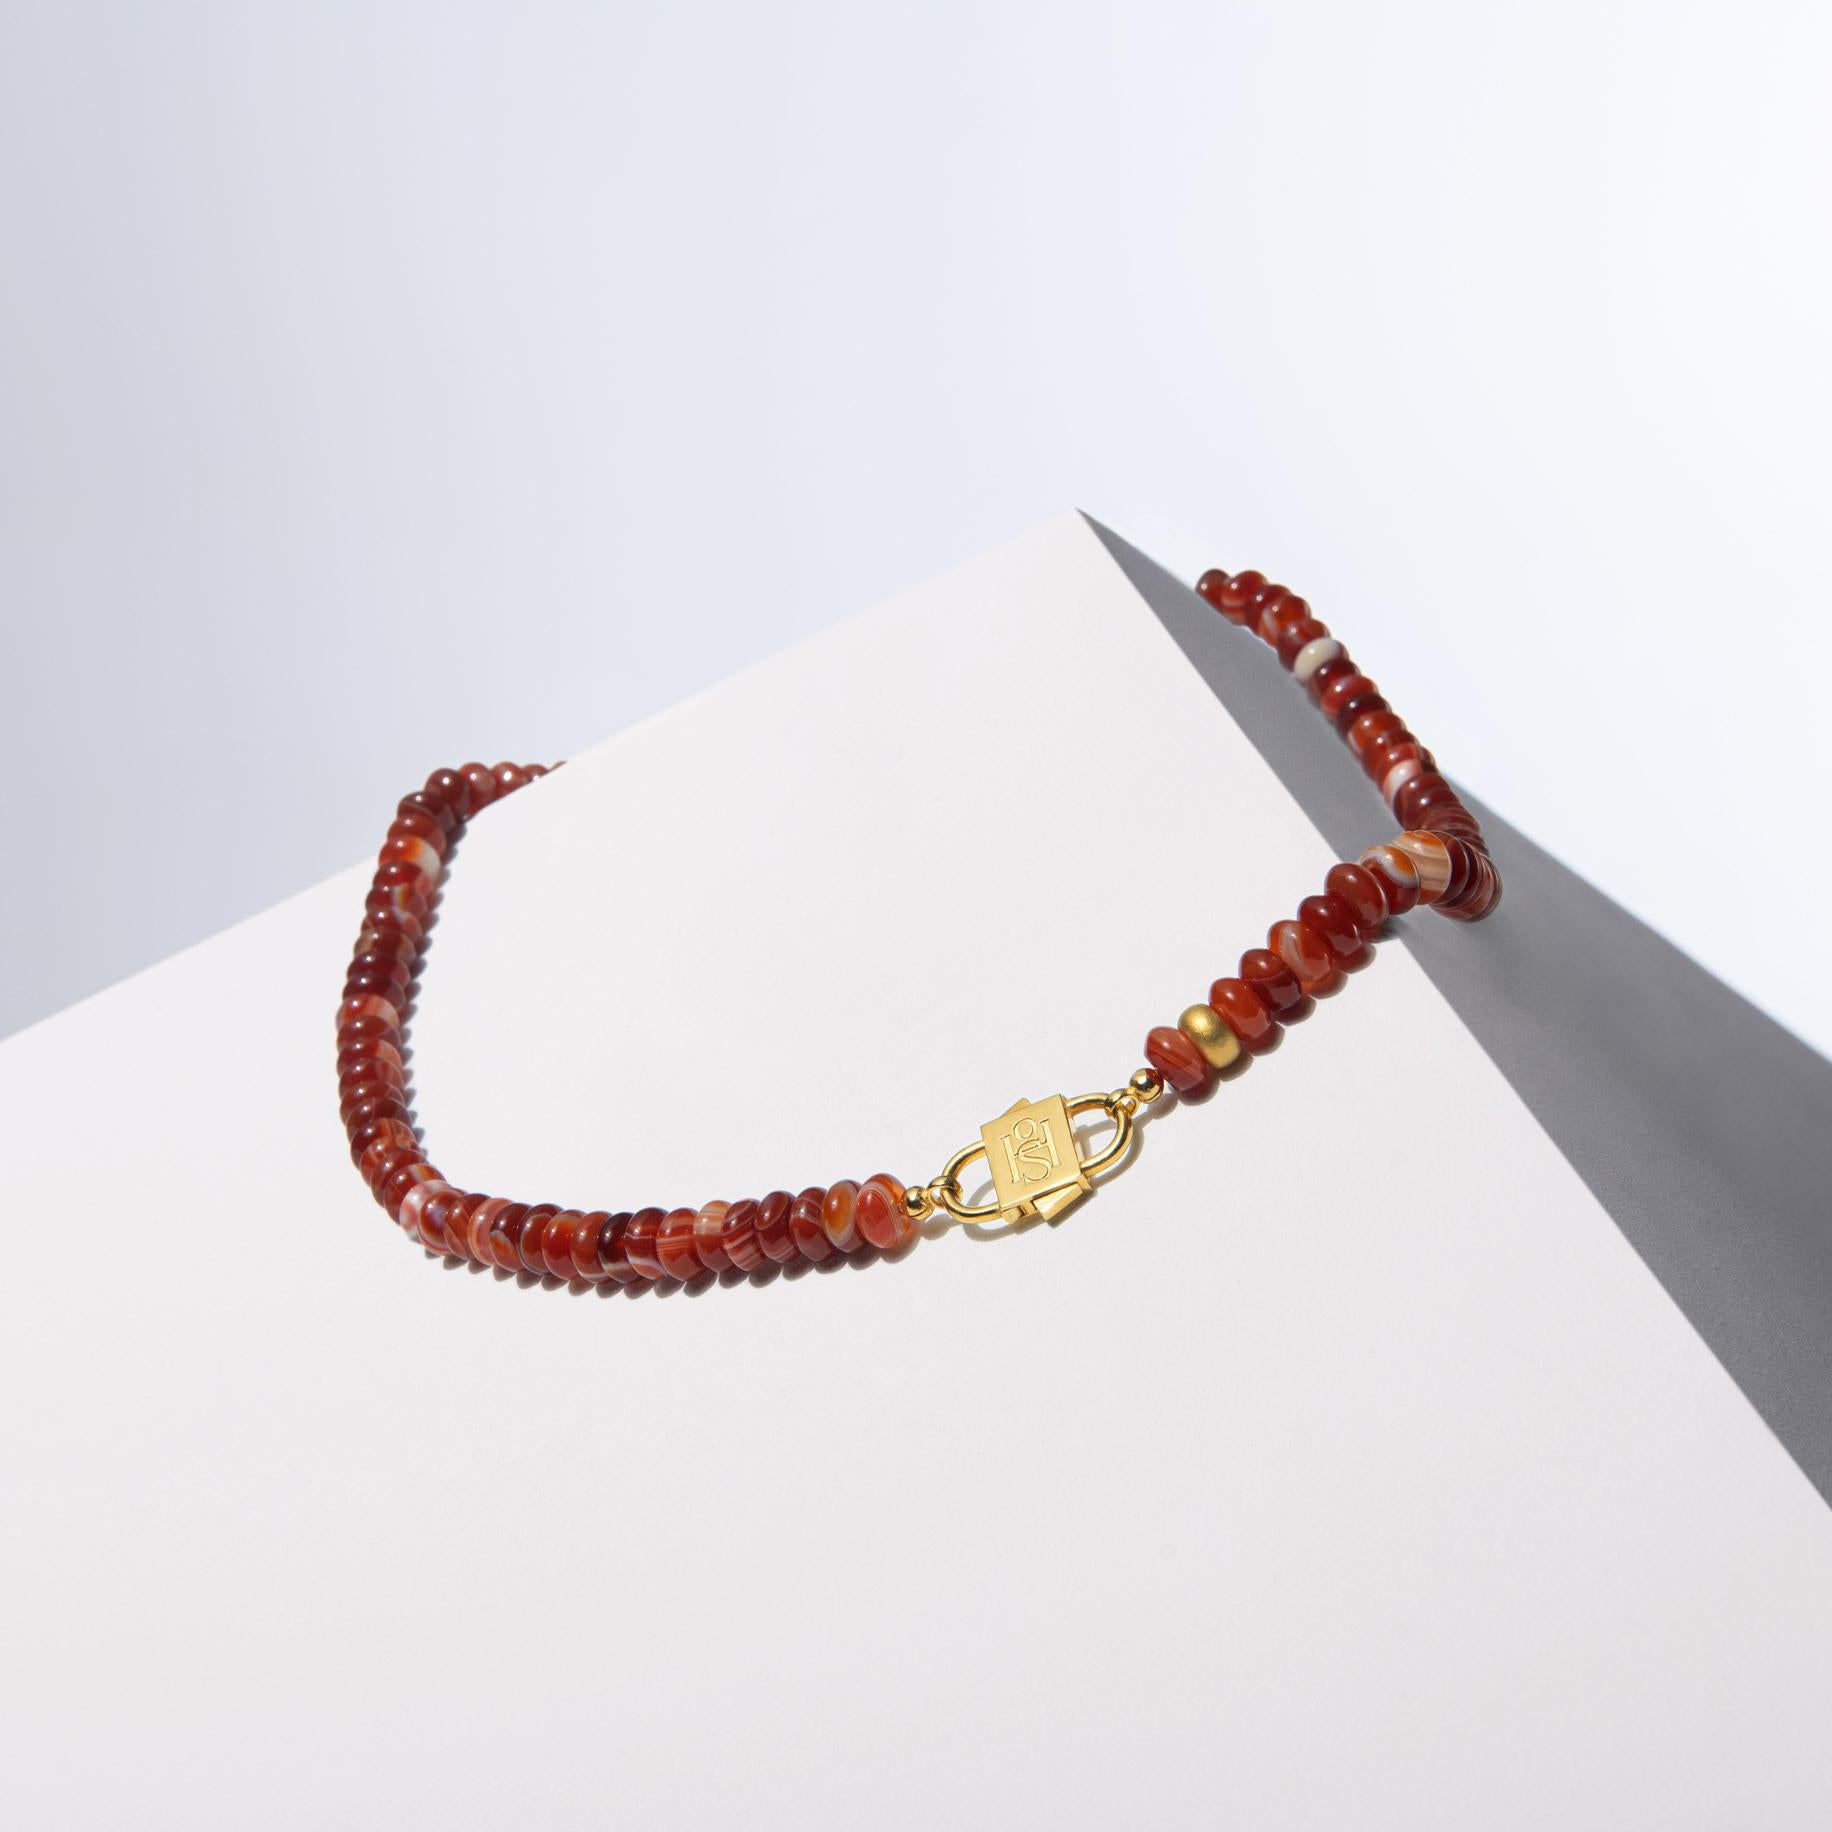 - Meticulously crafted with 8mm rondelle red agates, each handpicked for their distinctive charm and intense, vibrant color.
- The fiery red agates in the necklace exude a warm, eye-catching radiance, making it a standout accessory for any